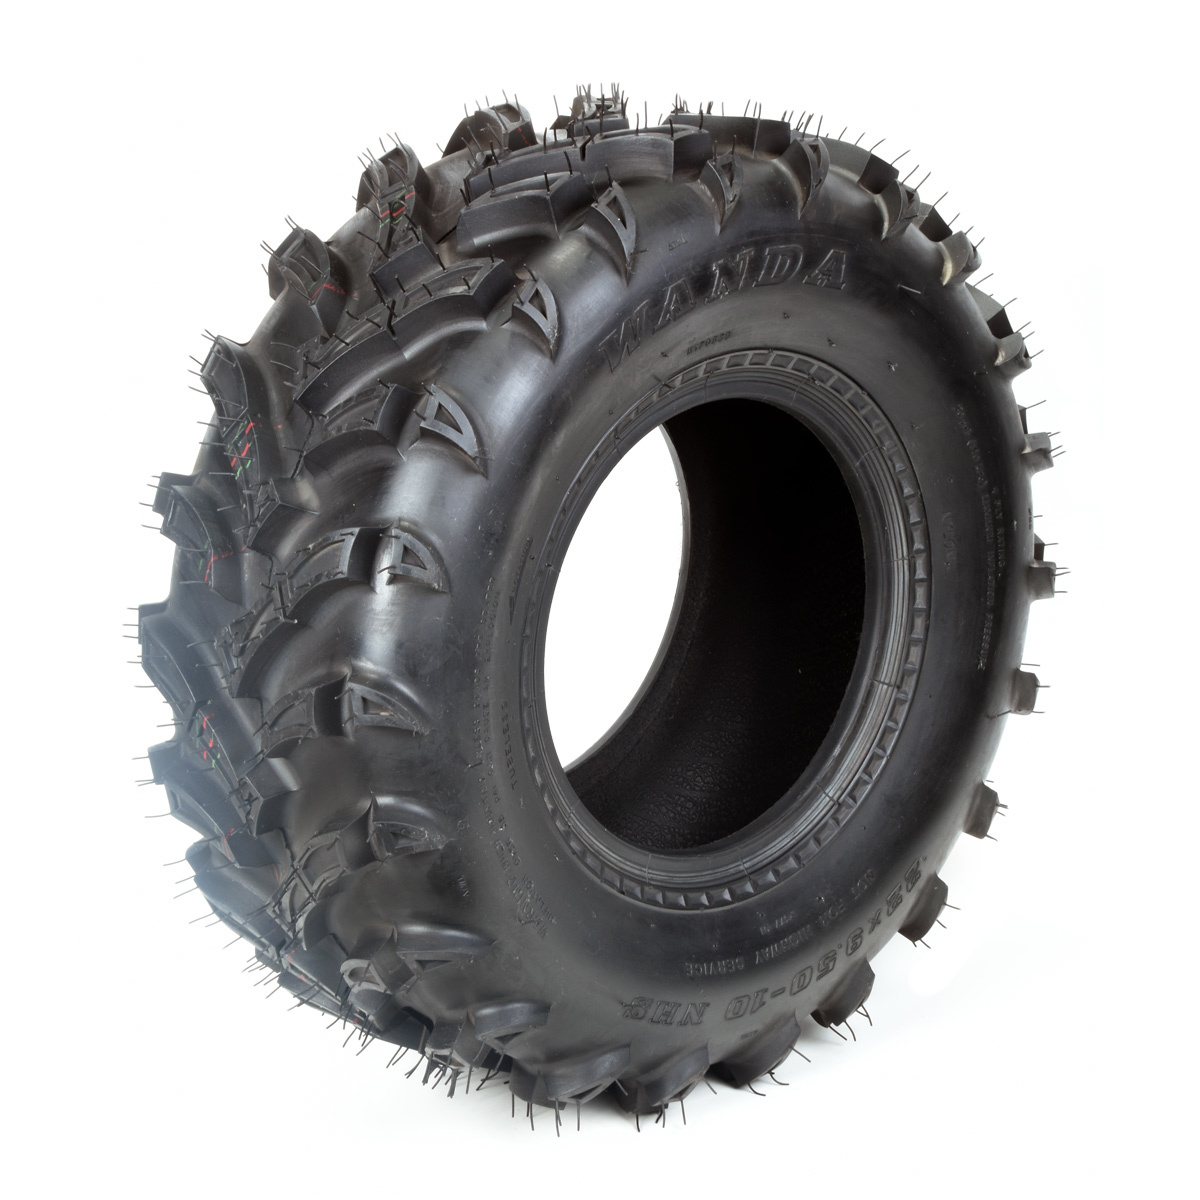 Front Tire for TX Gator